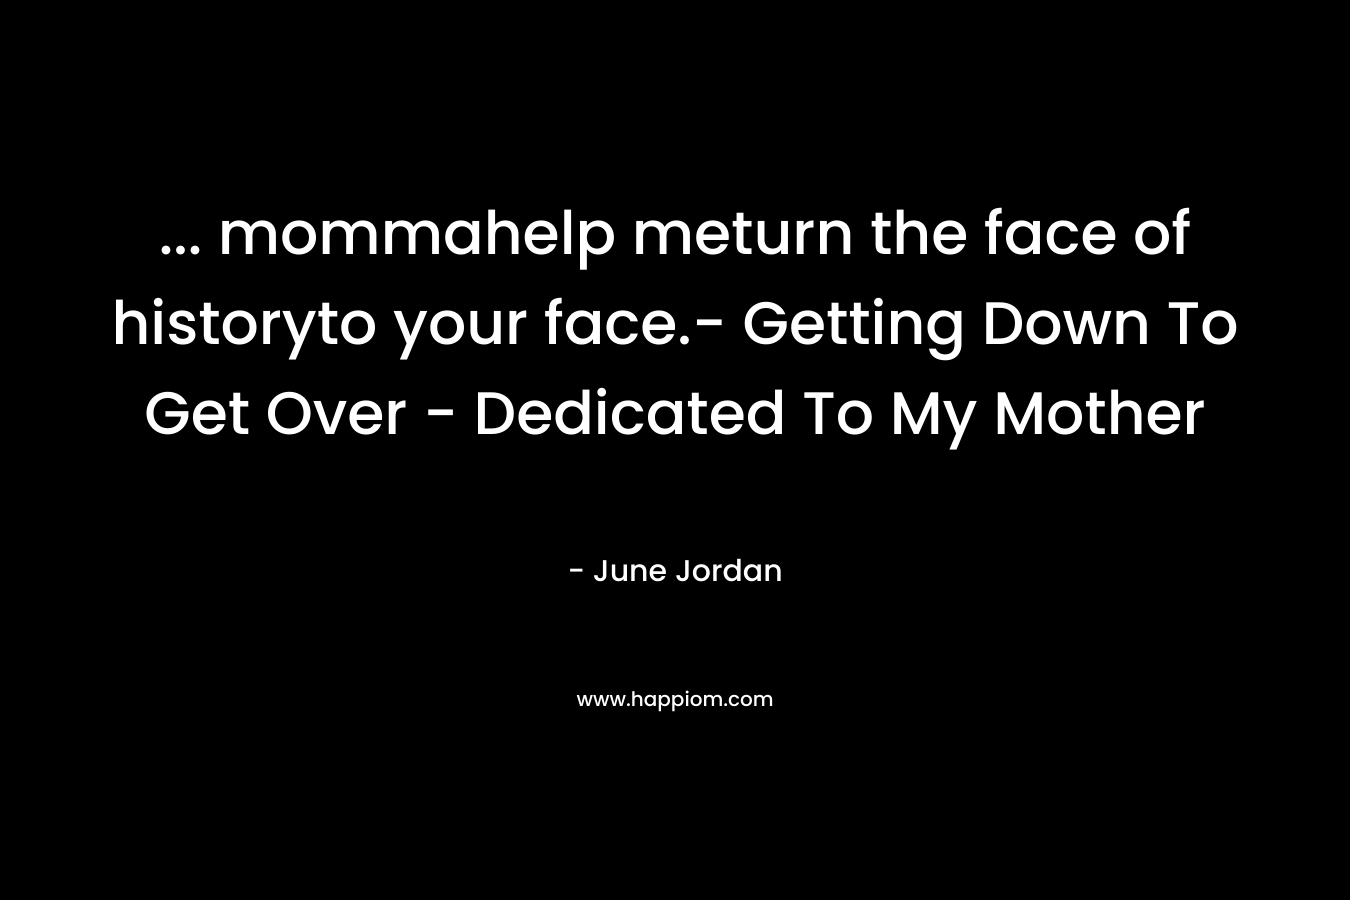 ... mommahelp meturn the face of historyto your face.- Getting Down To Get Over - Dedicated To My Mother